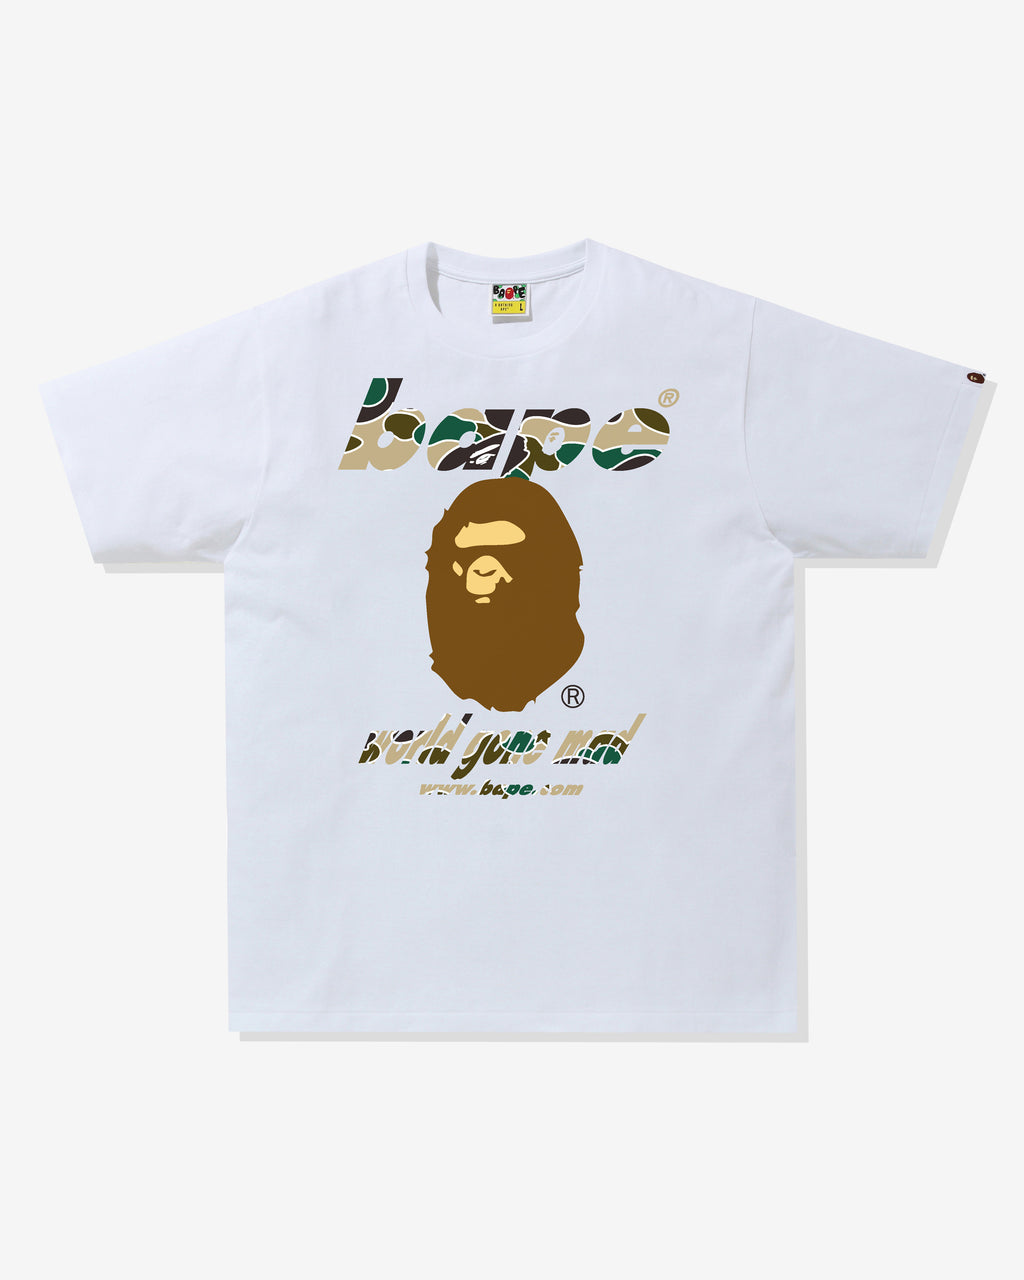 UNDEFEATED INC. - Mitchell & Ness x A BATHING APE® Tees